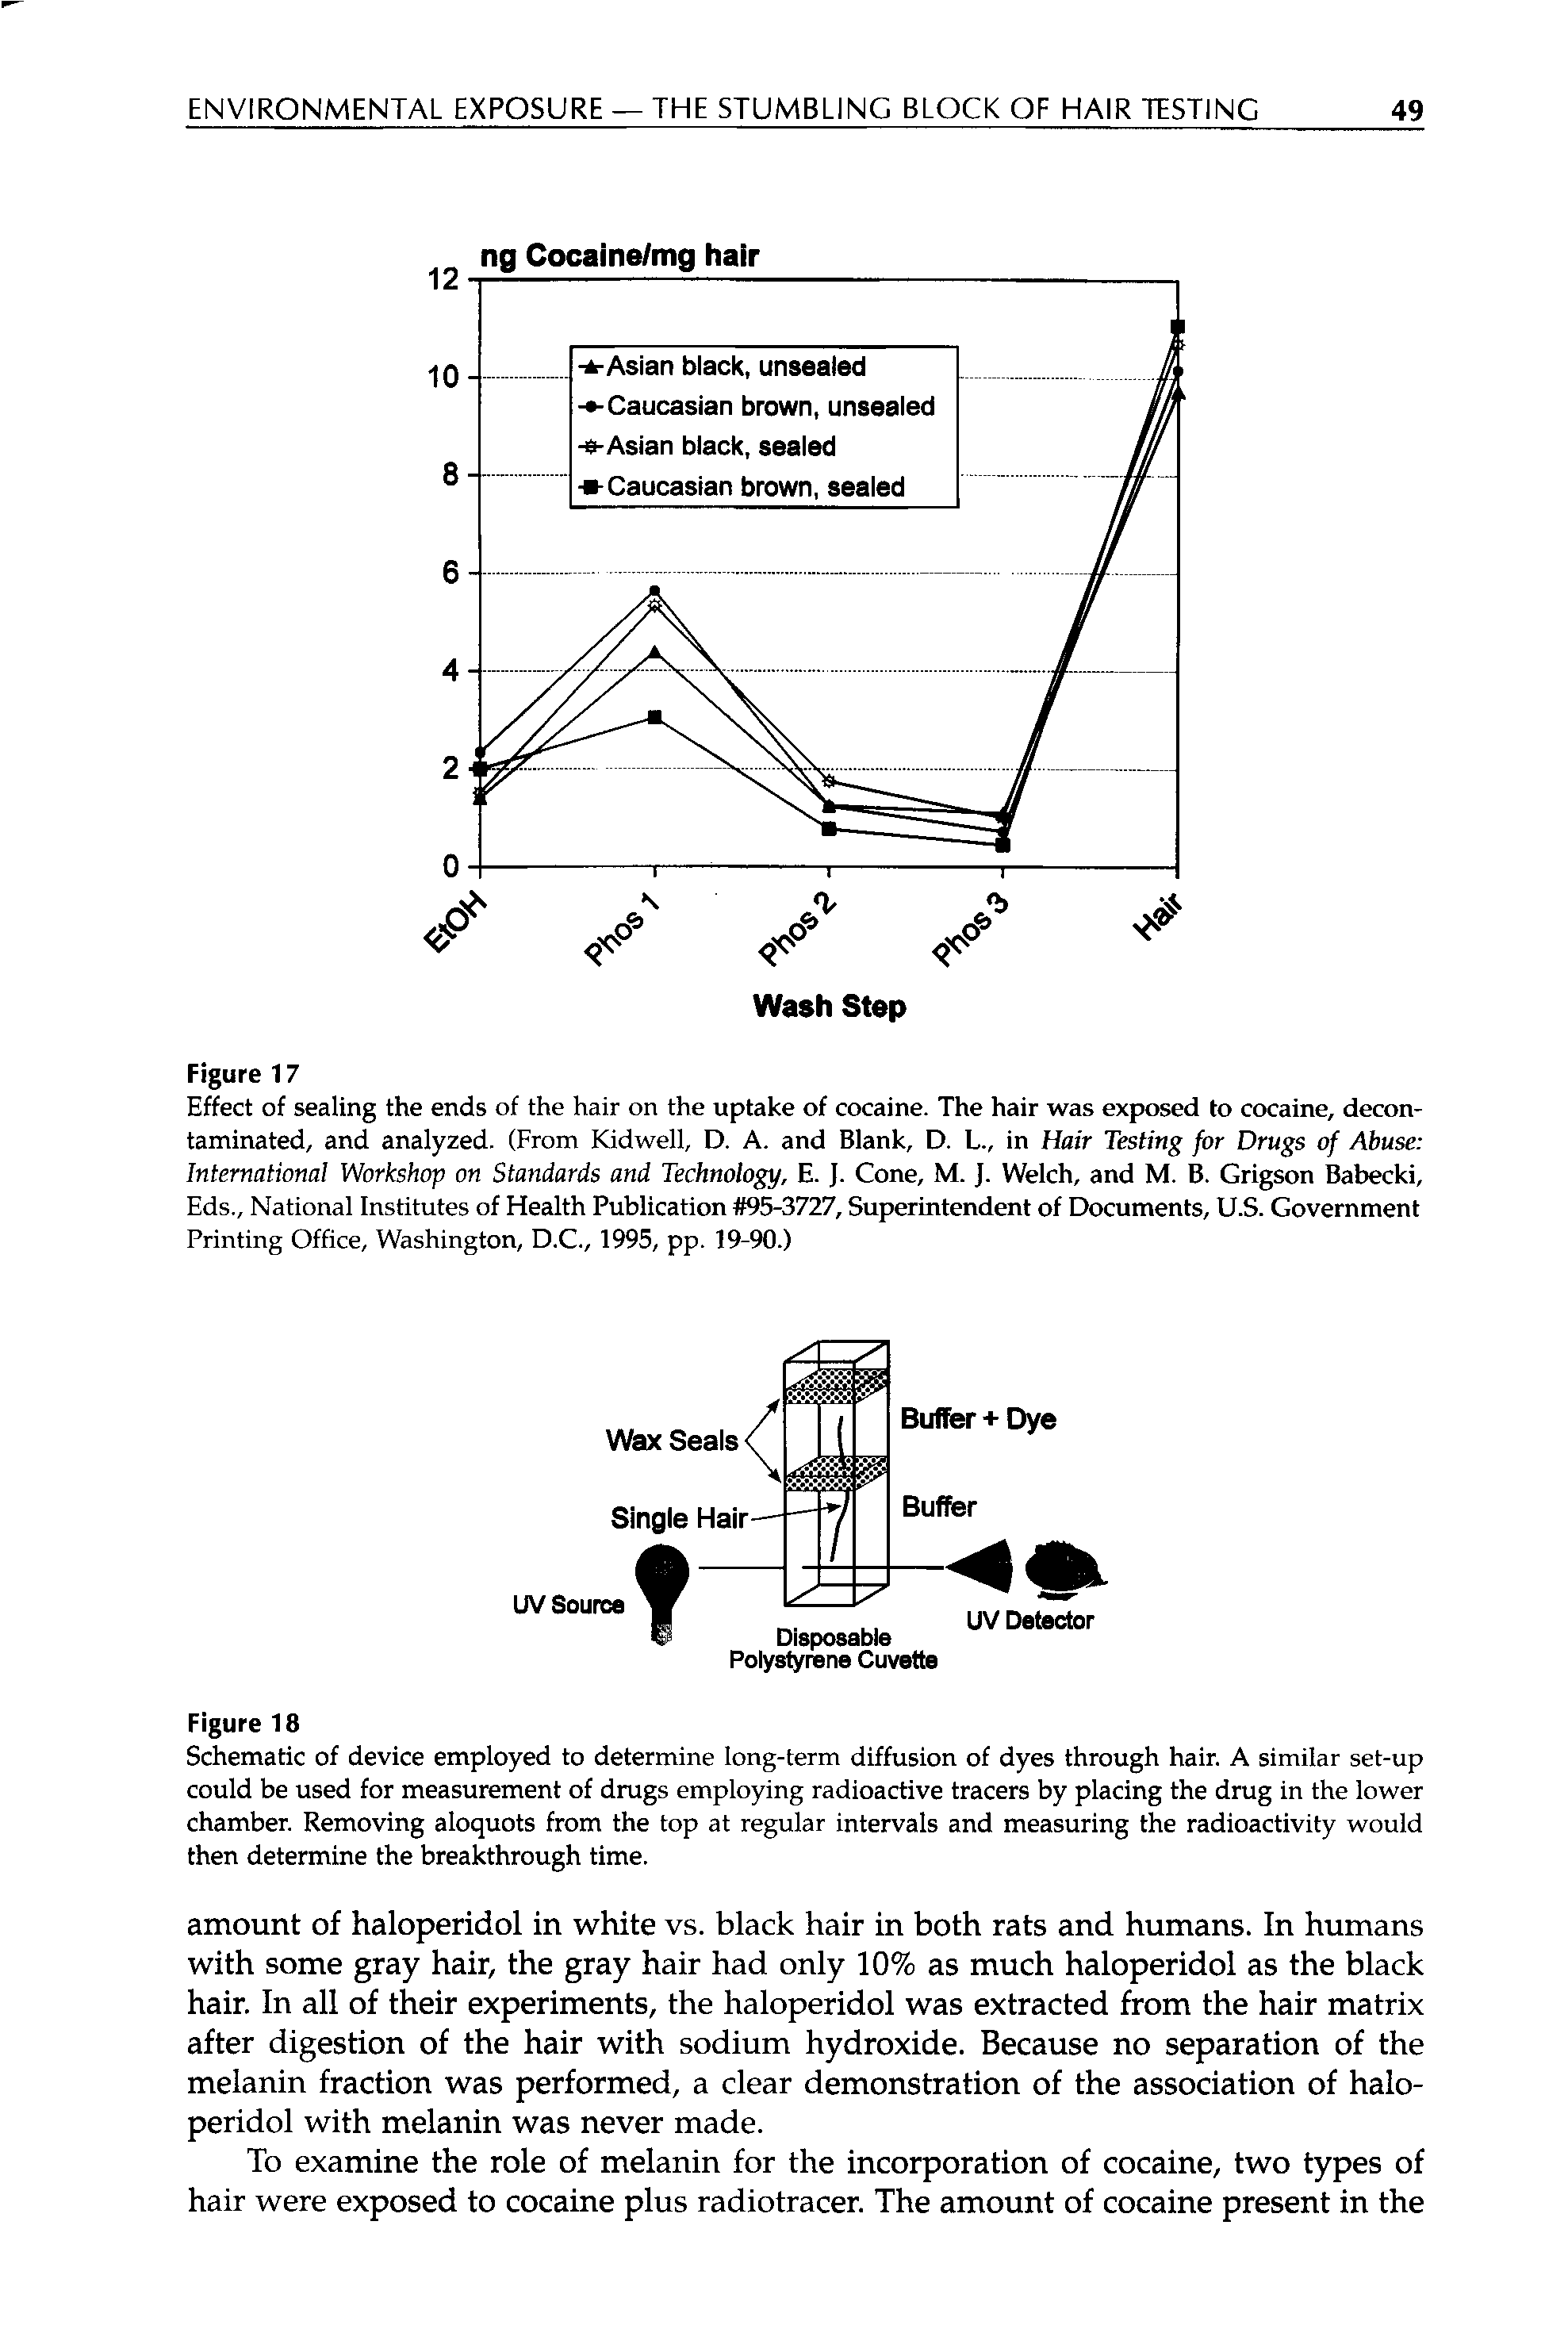 Schematic of device employed to determine long-term diffusion of dyes through hair. A similar set-up could be used for measurement of drugs employing radioactive tracers by placing the drug in the lower chamber. Removing aloquots from the top at regular intervals and measuring the radioactivity would then determine the breakthrough time.